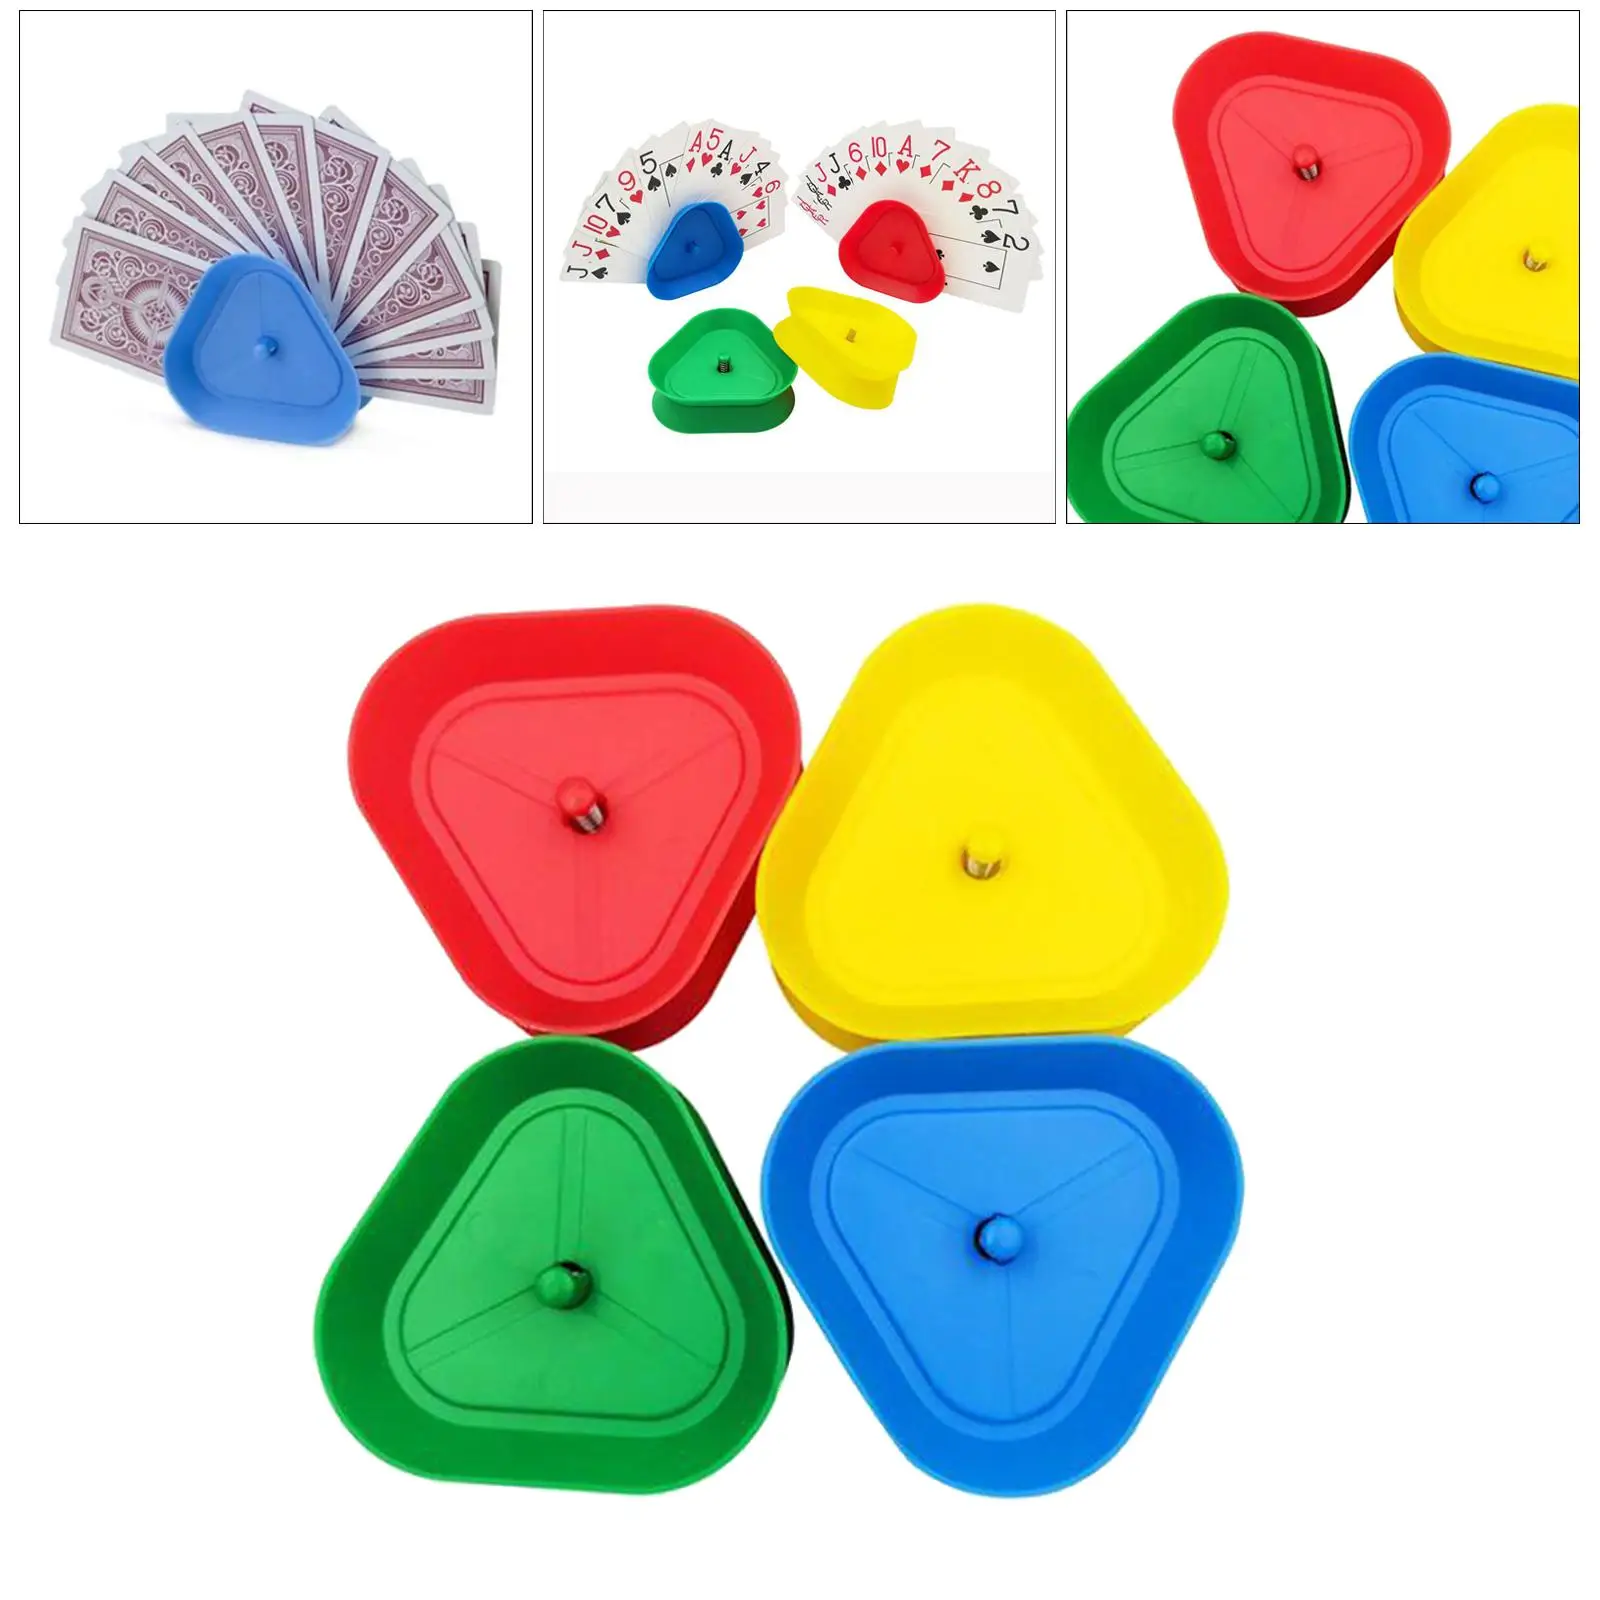 Set of 4 Triangle Shaped Poker Playing Card Holder Red Blue Green Yellow